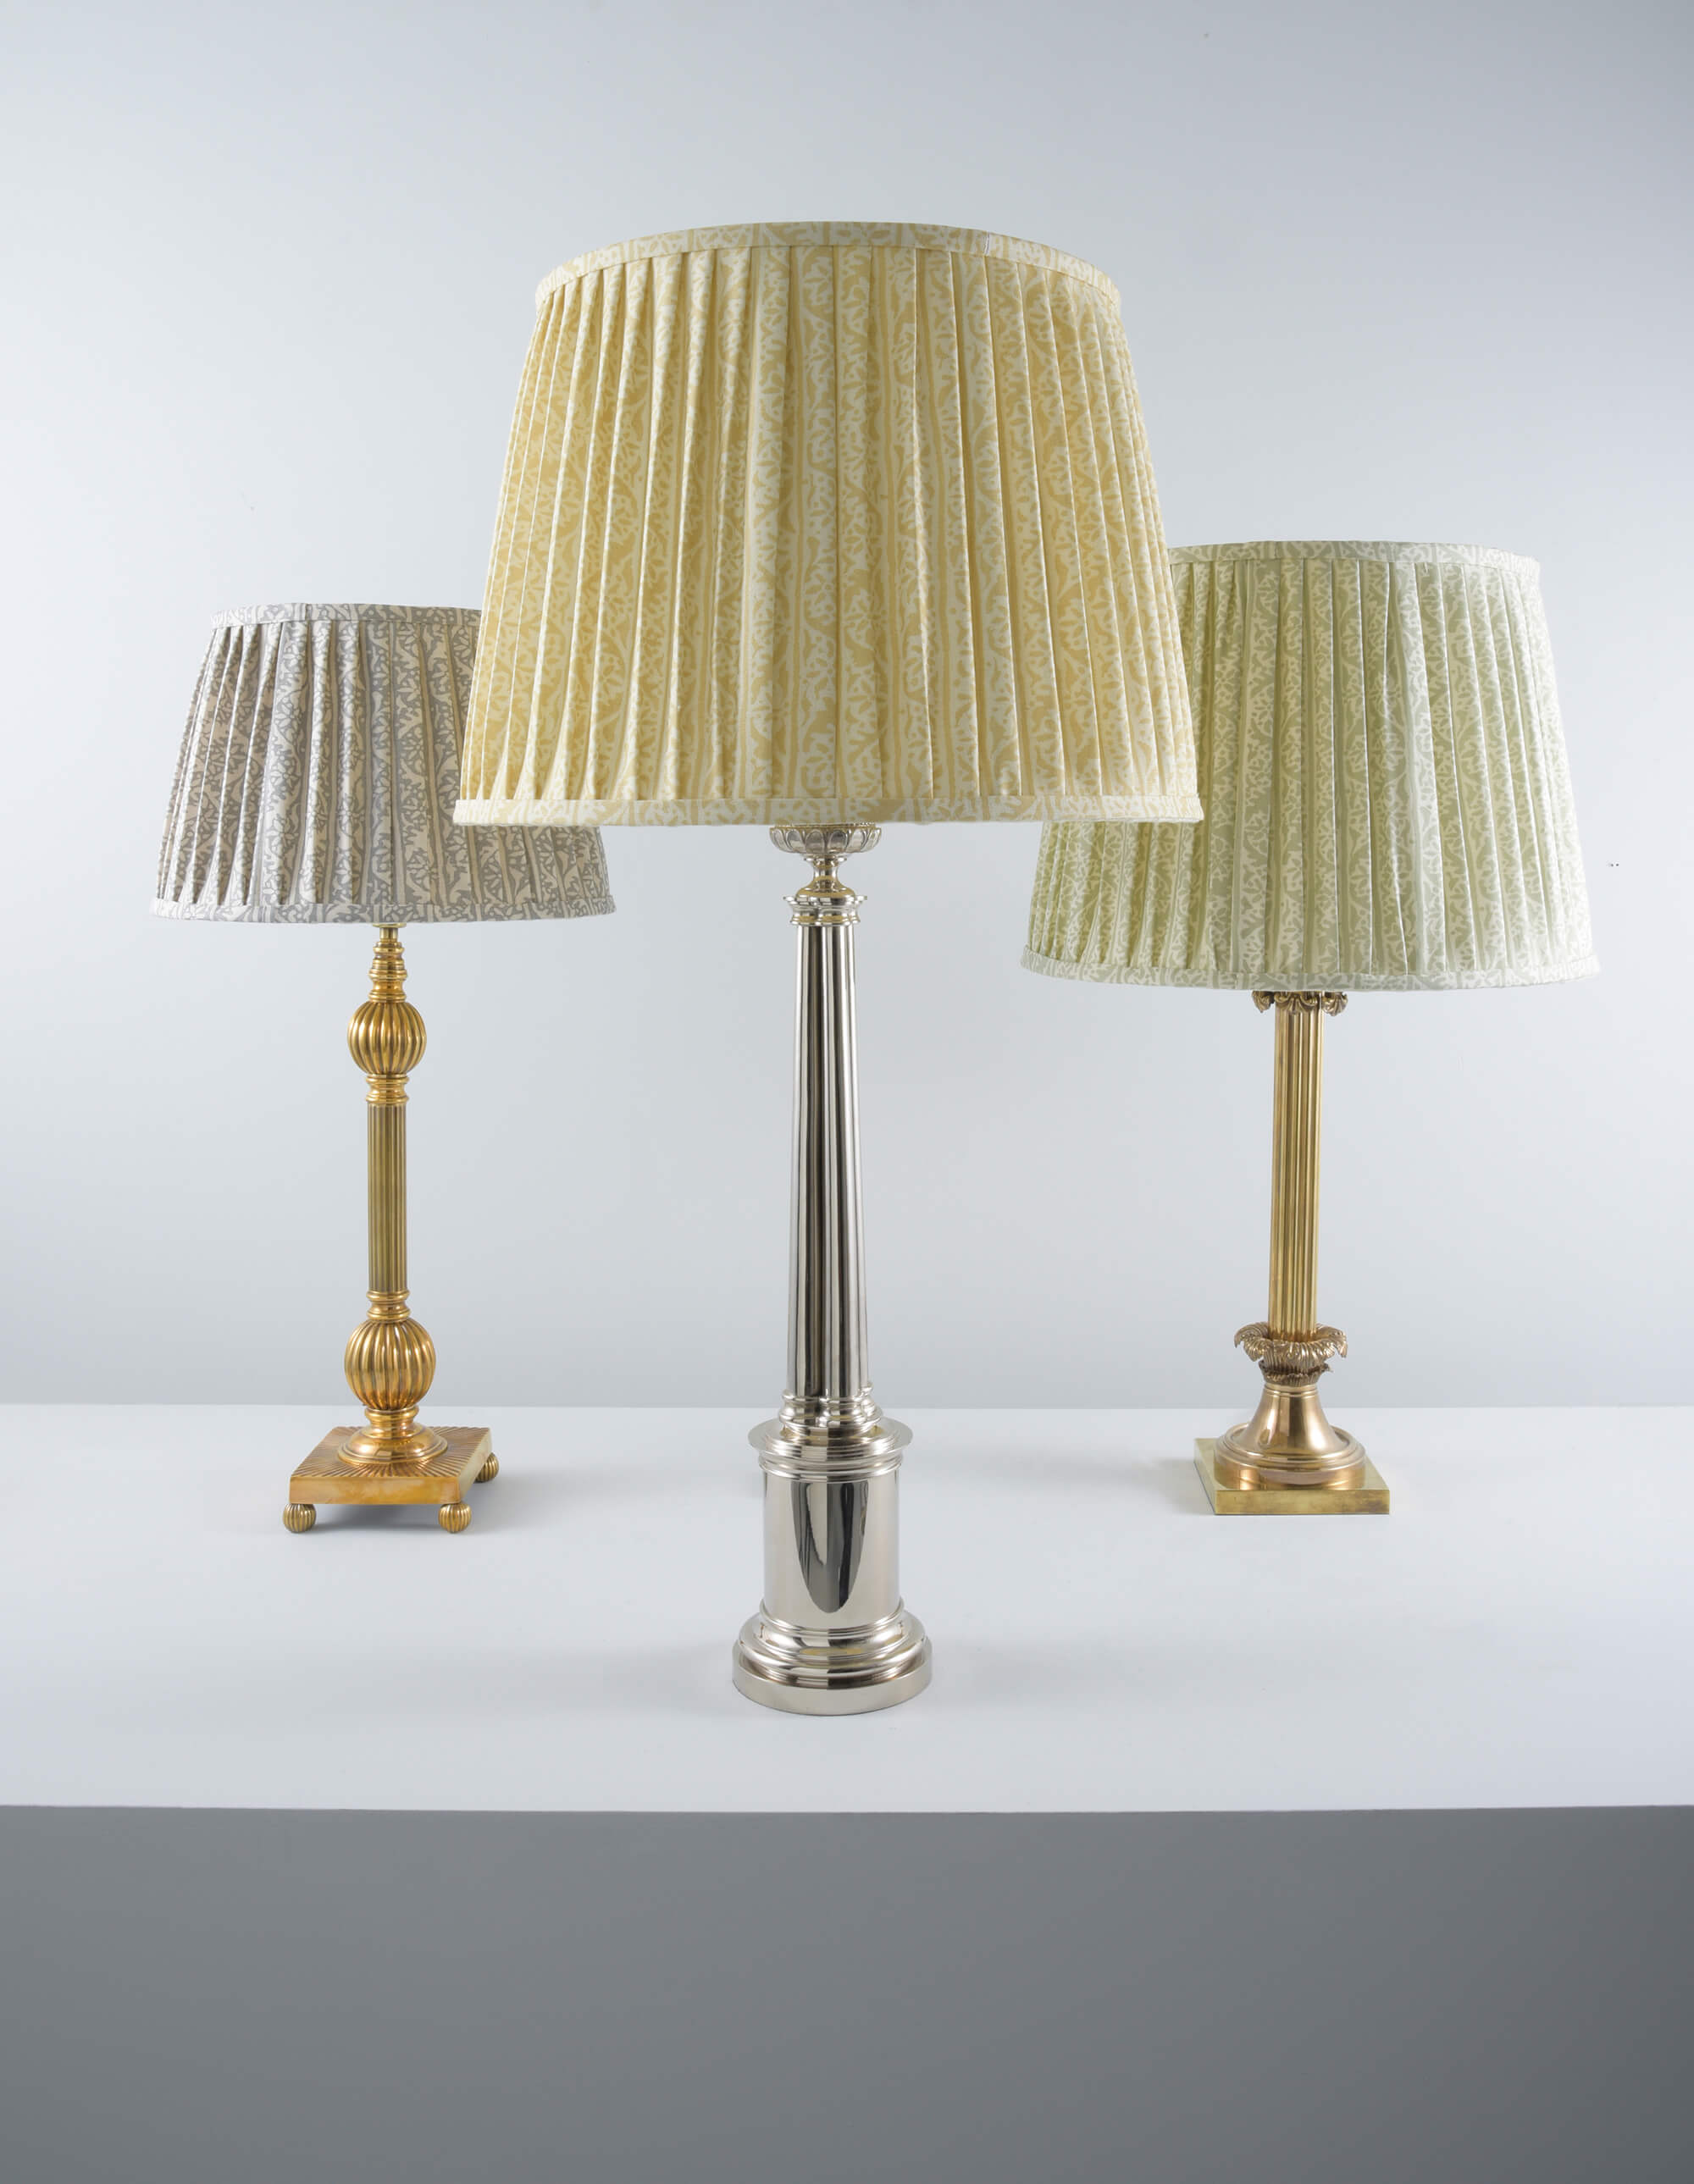 Neoclassical solid brass table lamps by Collier Webb